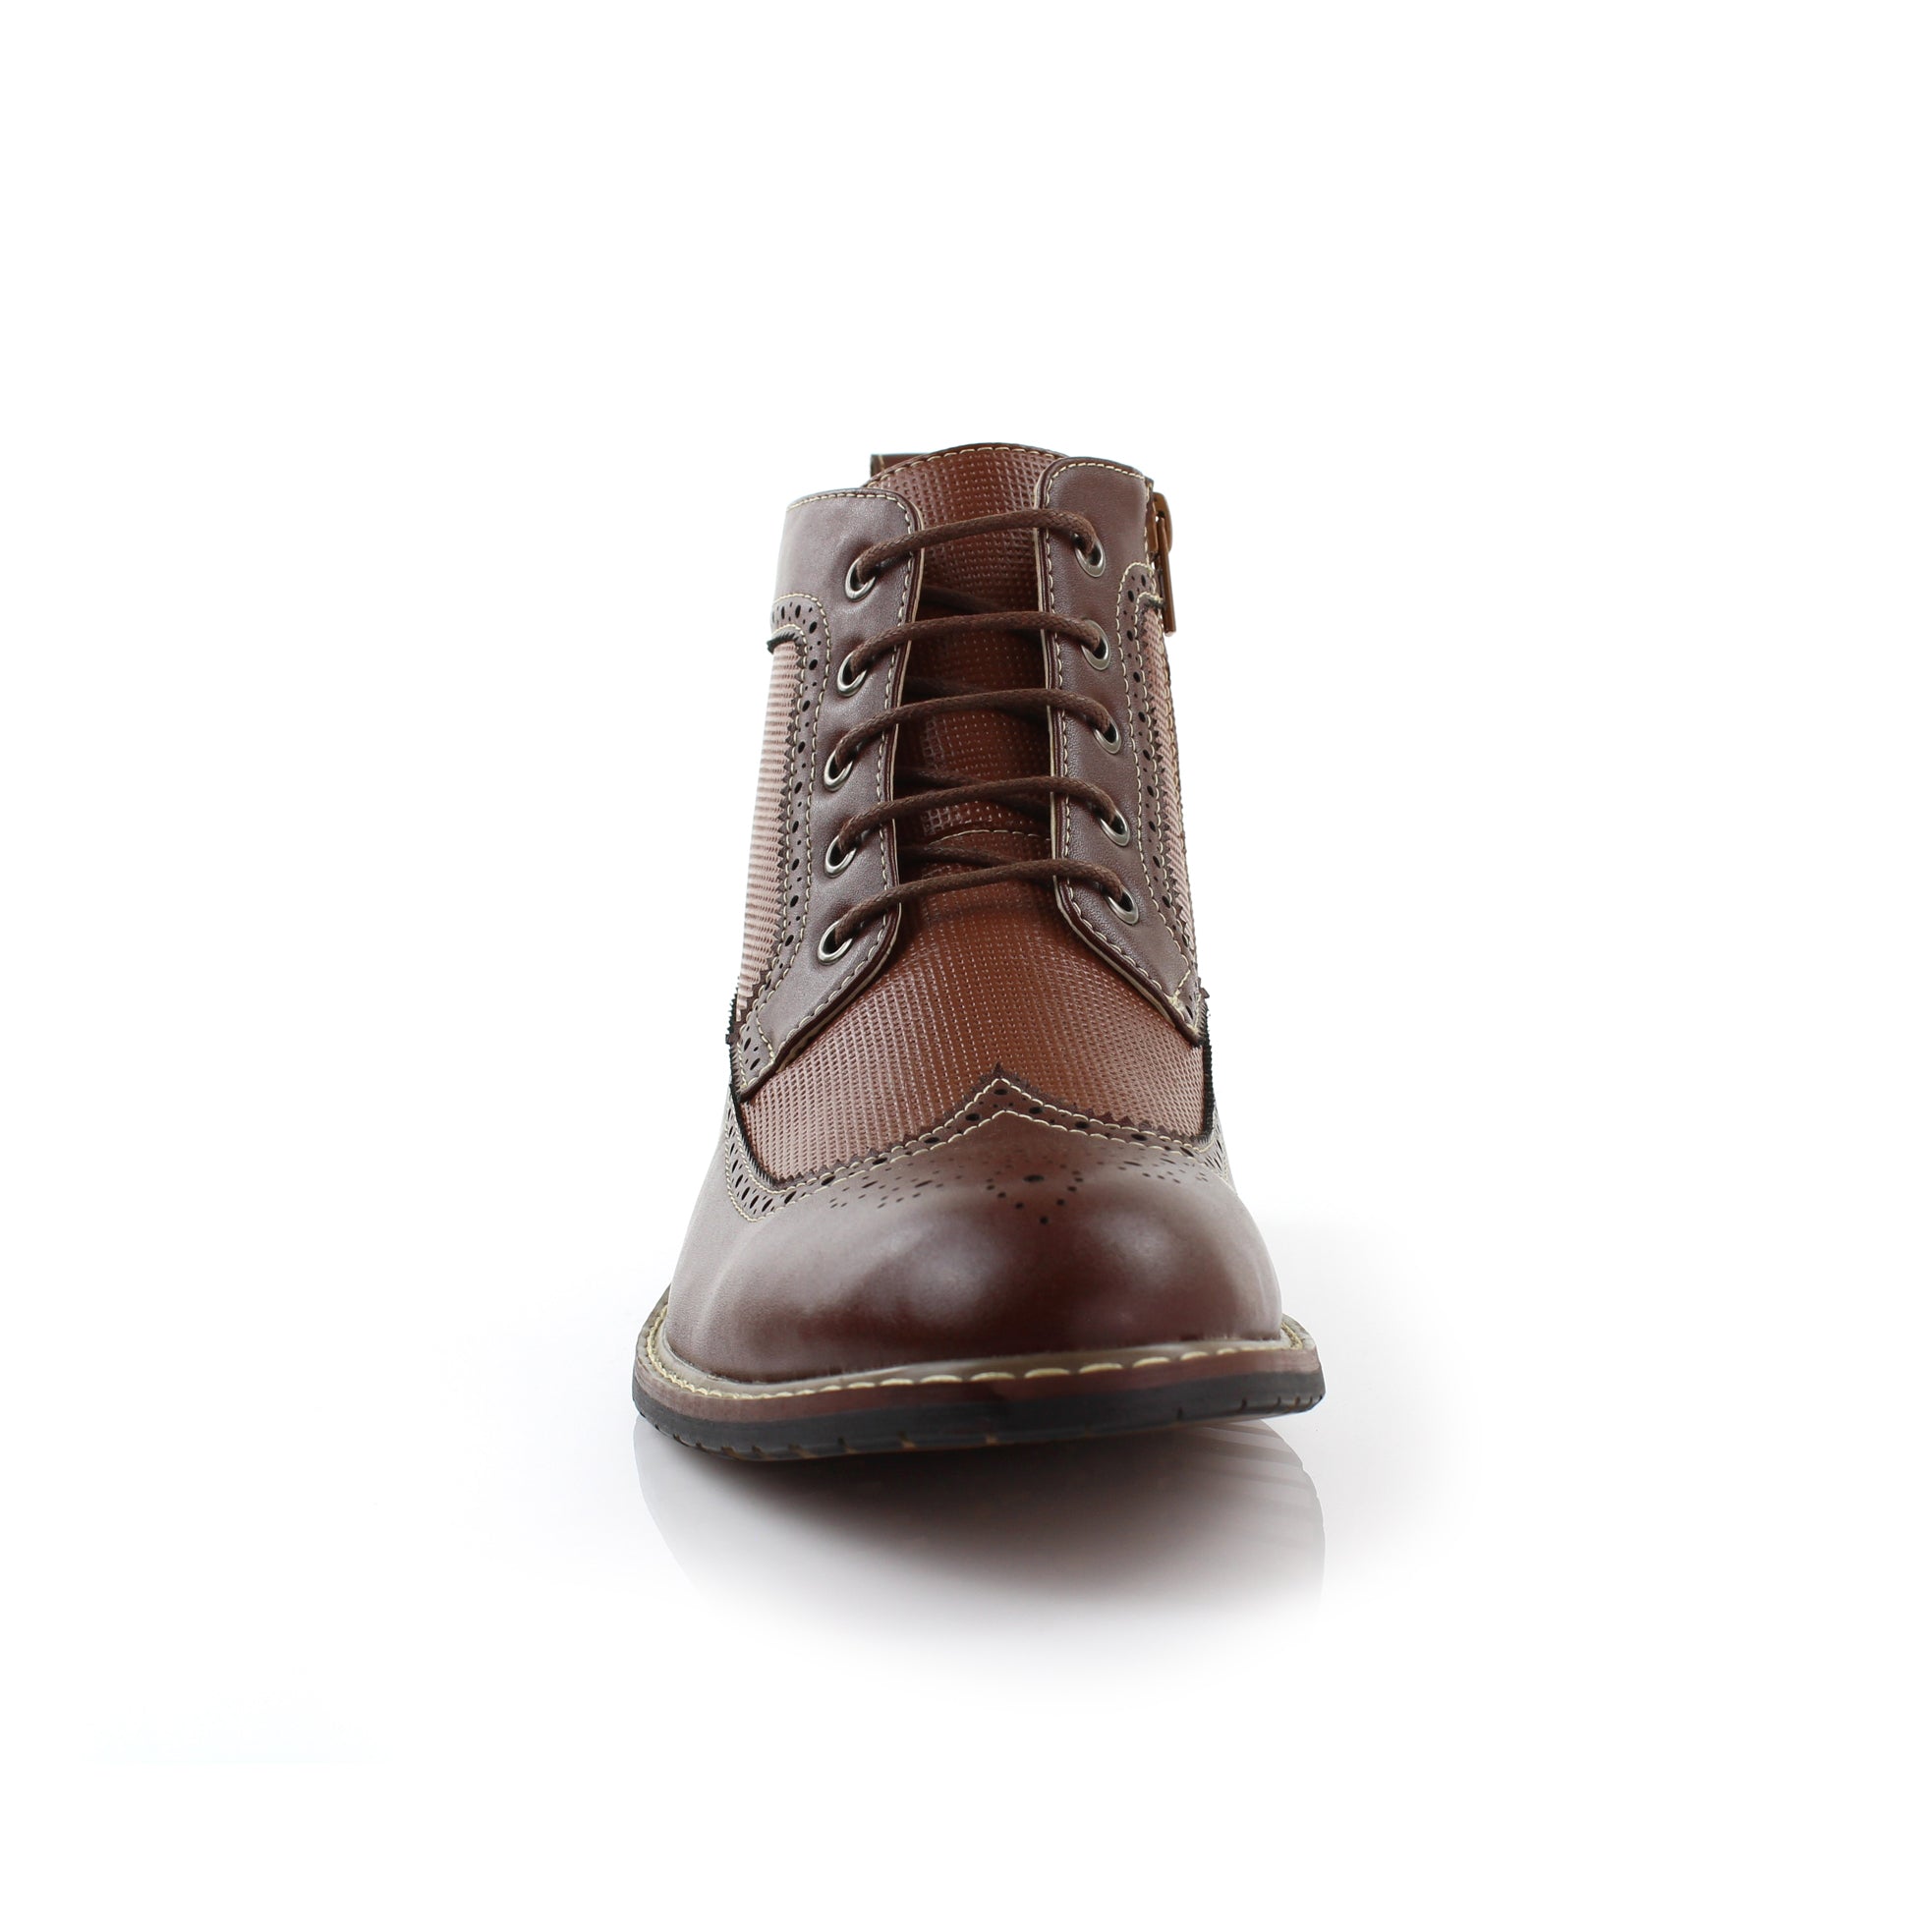 Two-Toned Brogue Wingtip Boots | Michael by Ferro Aldo | Conal Footwear | Front Angle View